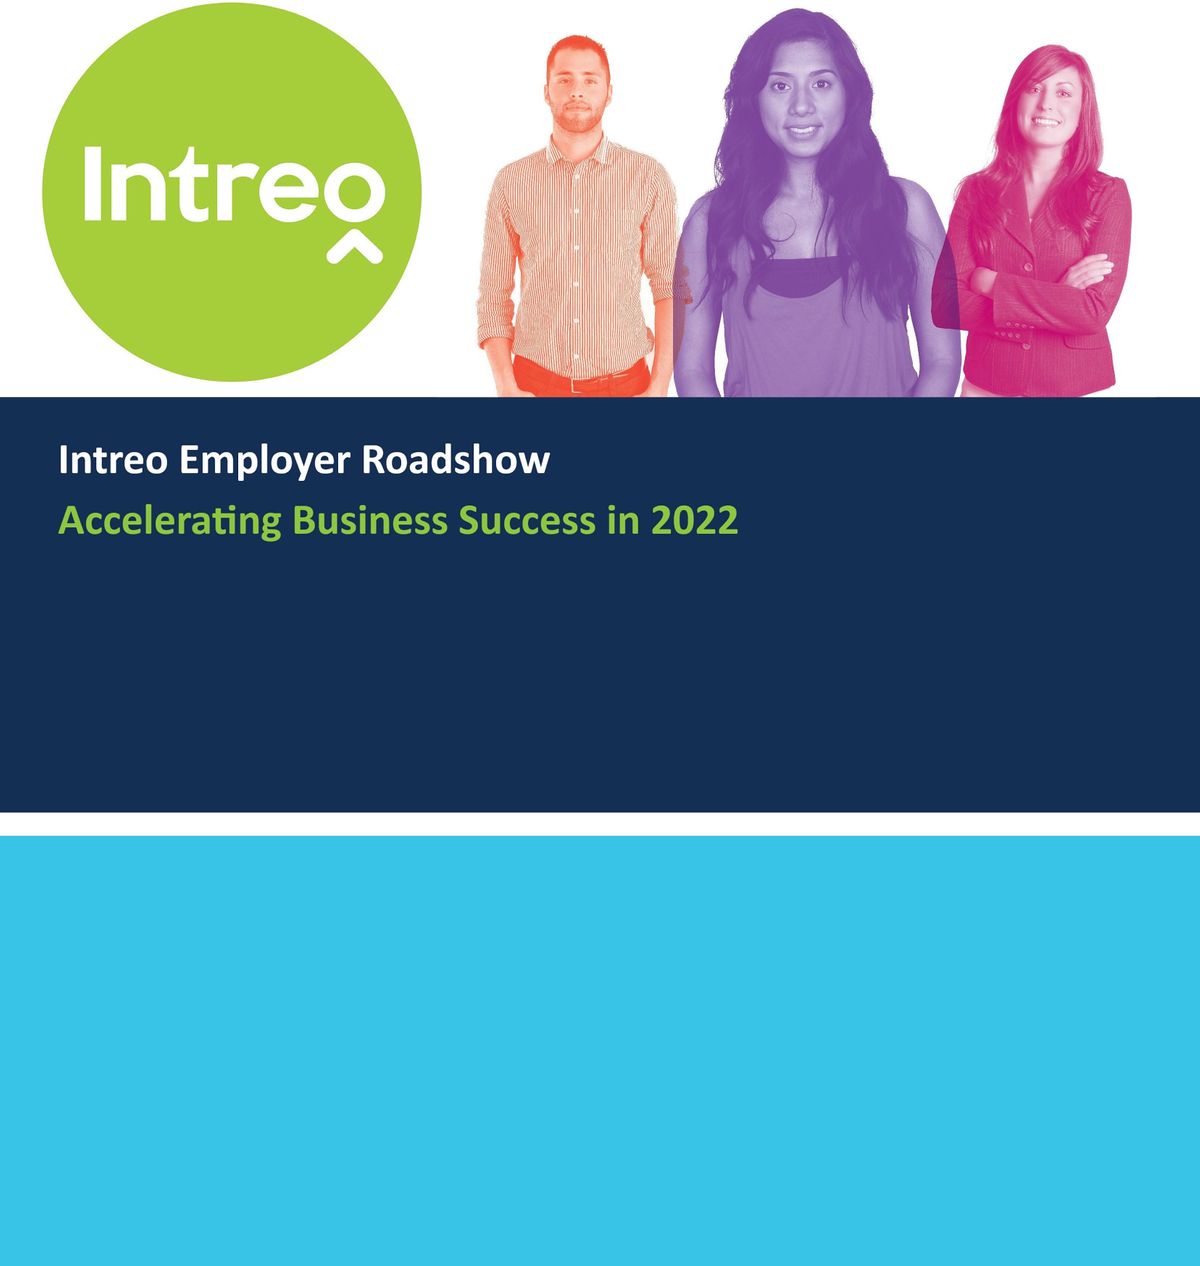 Intreo Employer Roadshow - Accelerating Business Success 2022